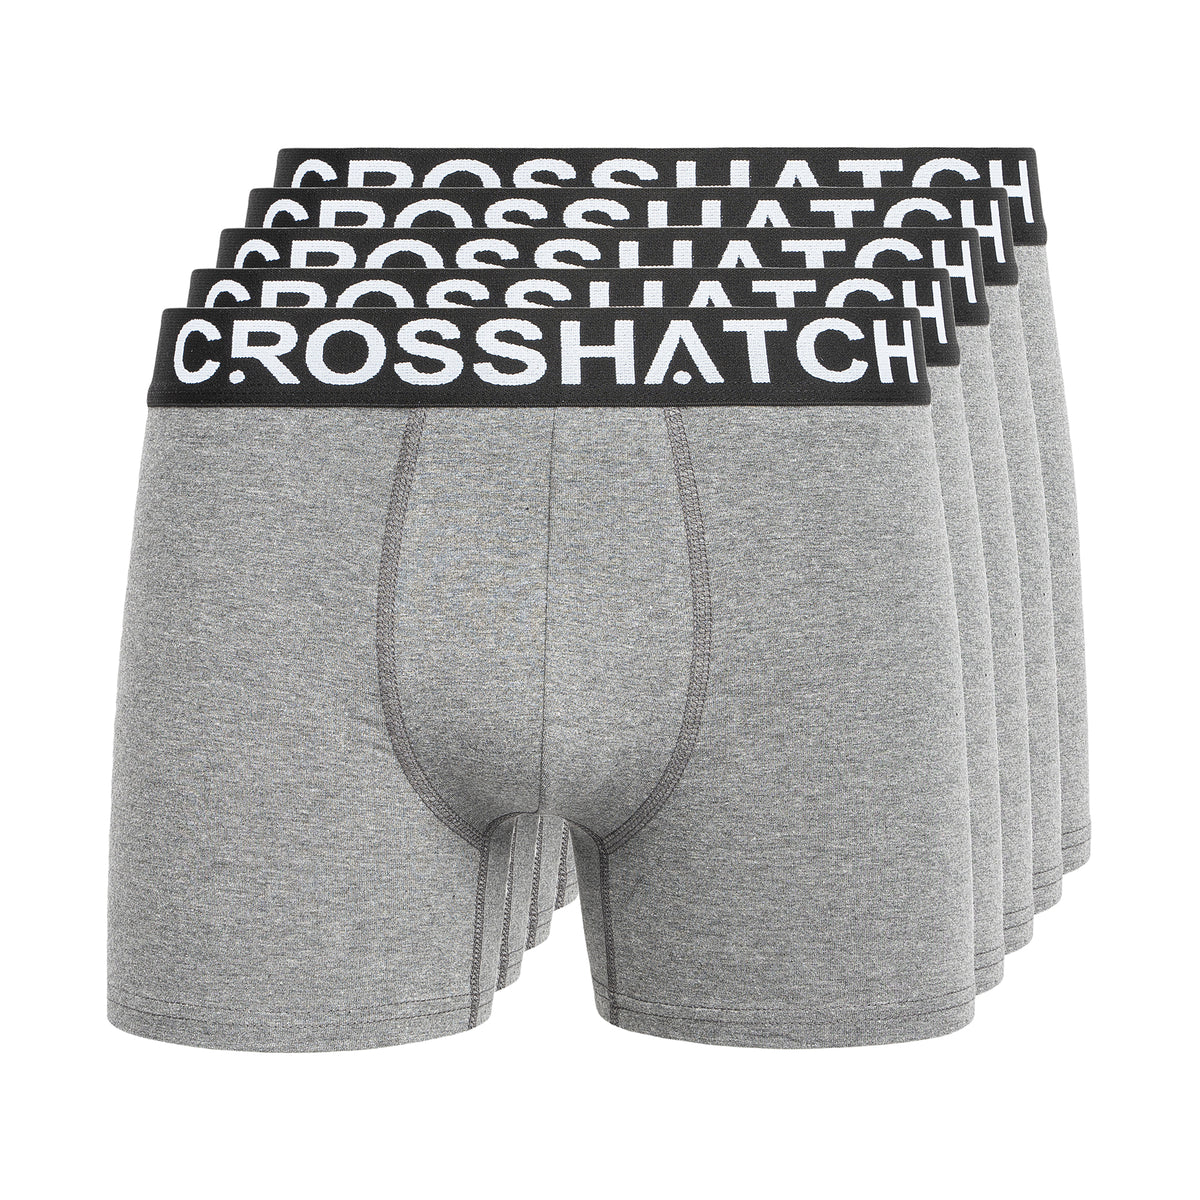 Crosshatch Mens Astral Boxer Shorts (Pack of 5) | Discounts on great Brands